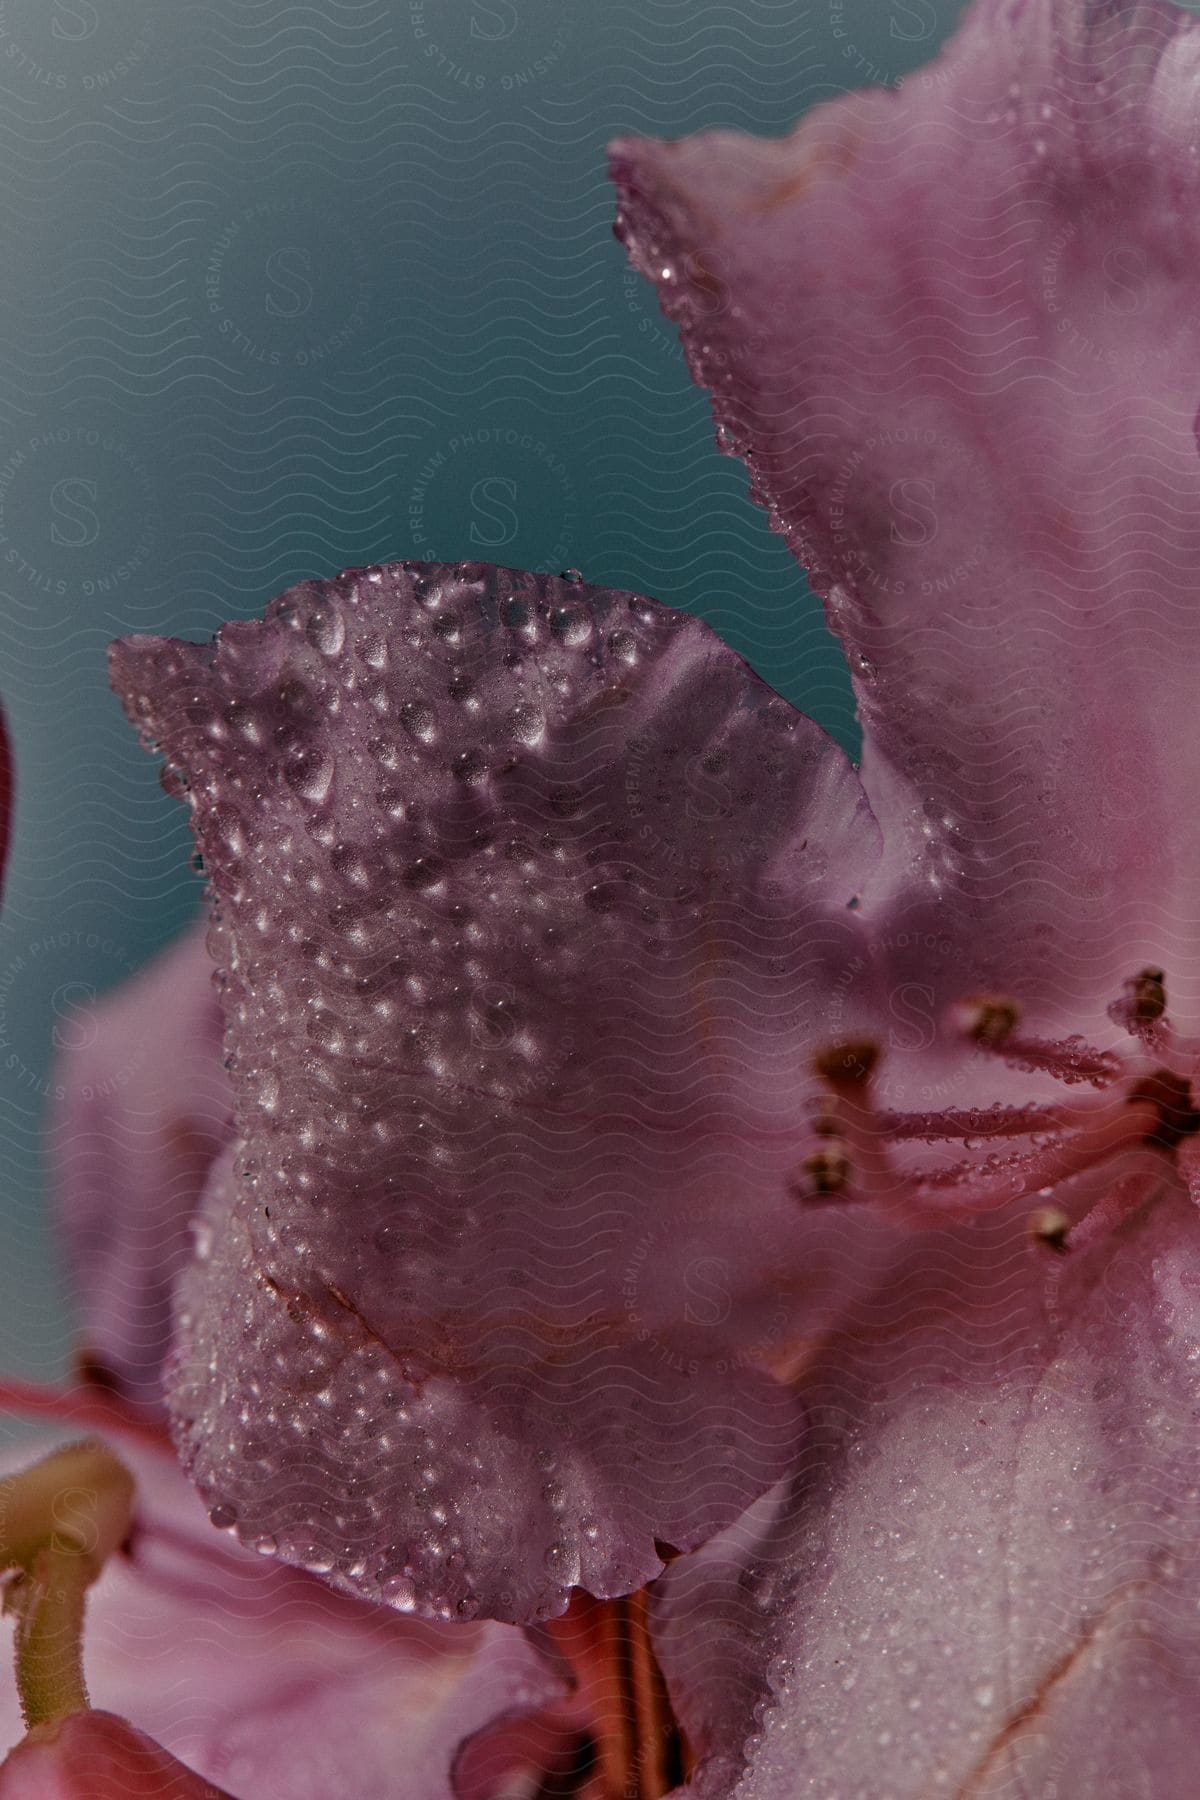 A purple and pink flower with water droplets on its petals